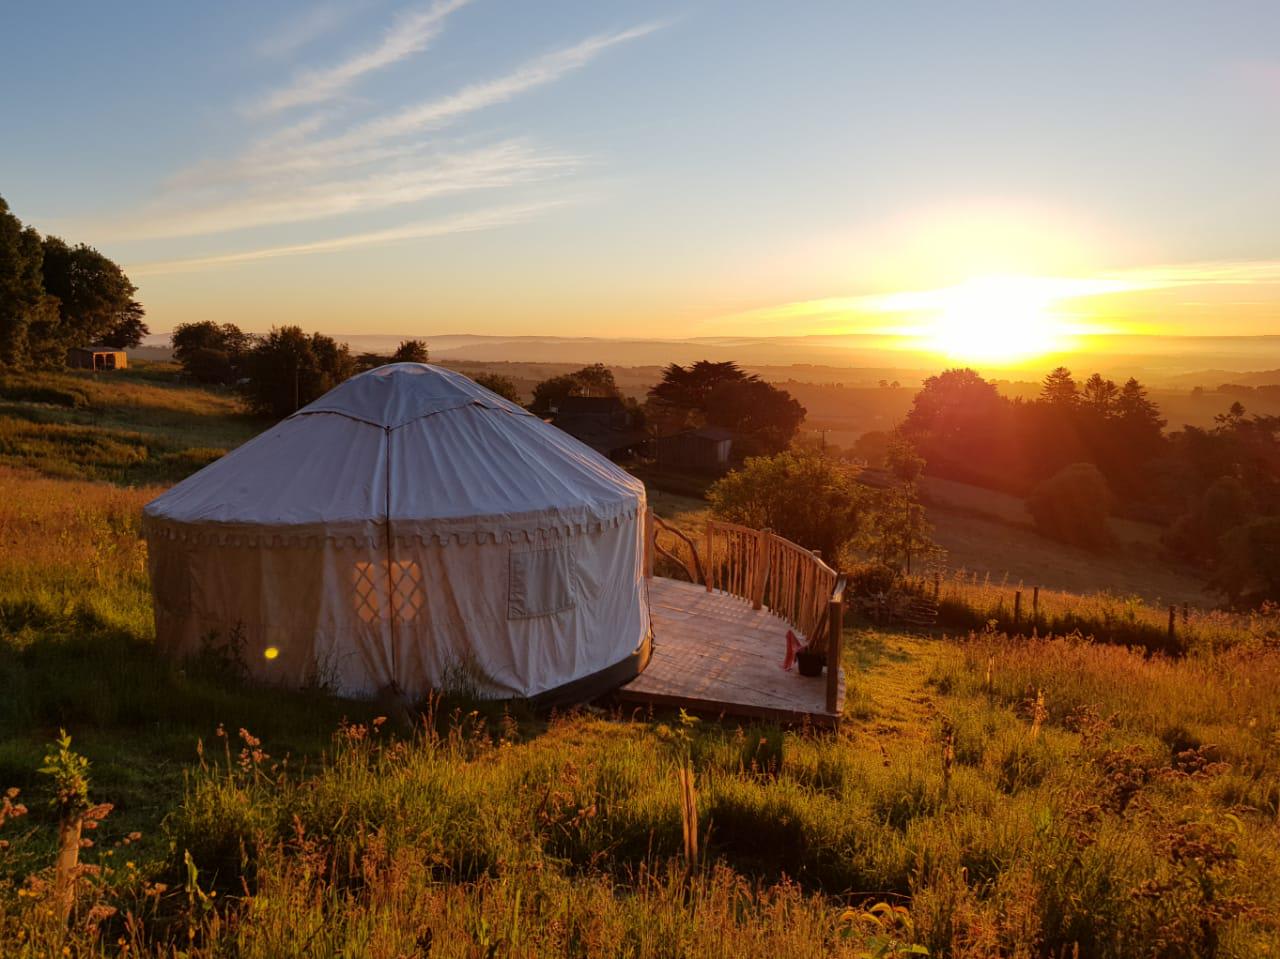 The beautiful sunrises at Penhill Farm are the reason behind the glamping site's name.